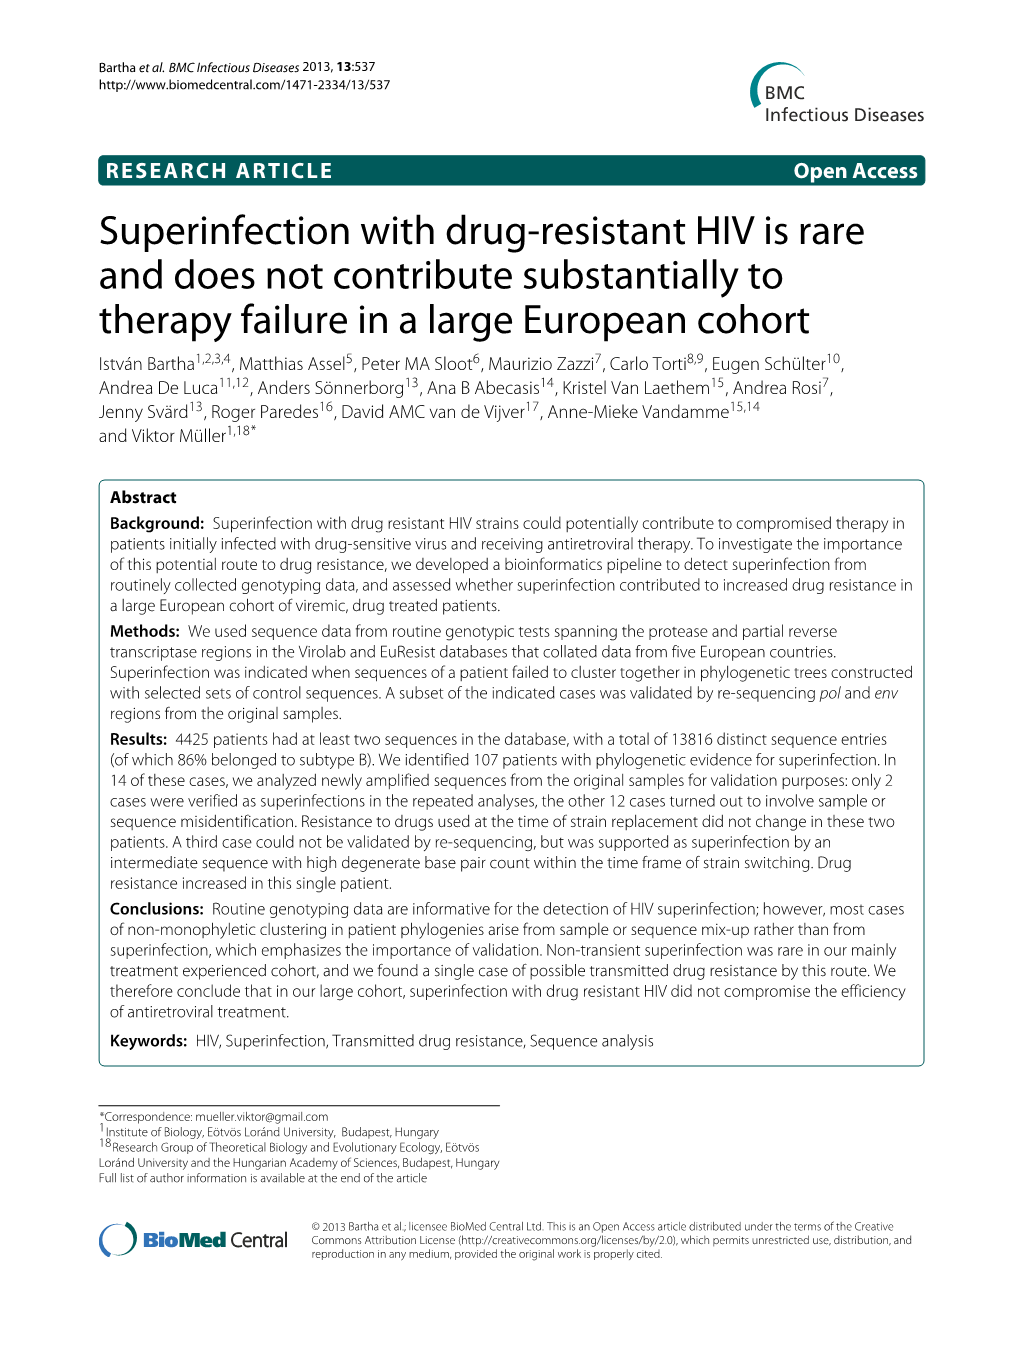 Superinfection with Drug-Resistant HIV Is Rare and Does Not Contribute